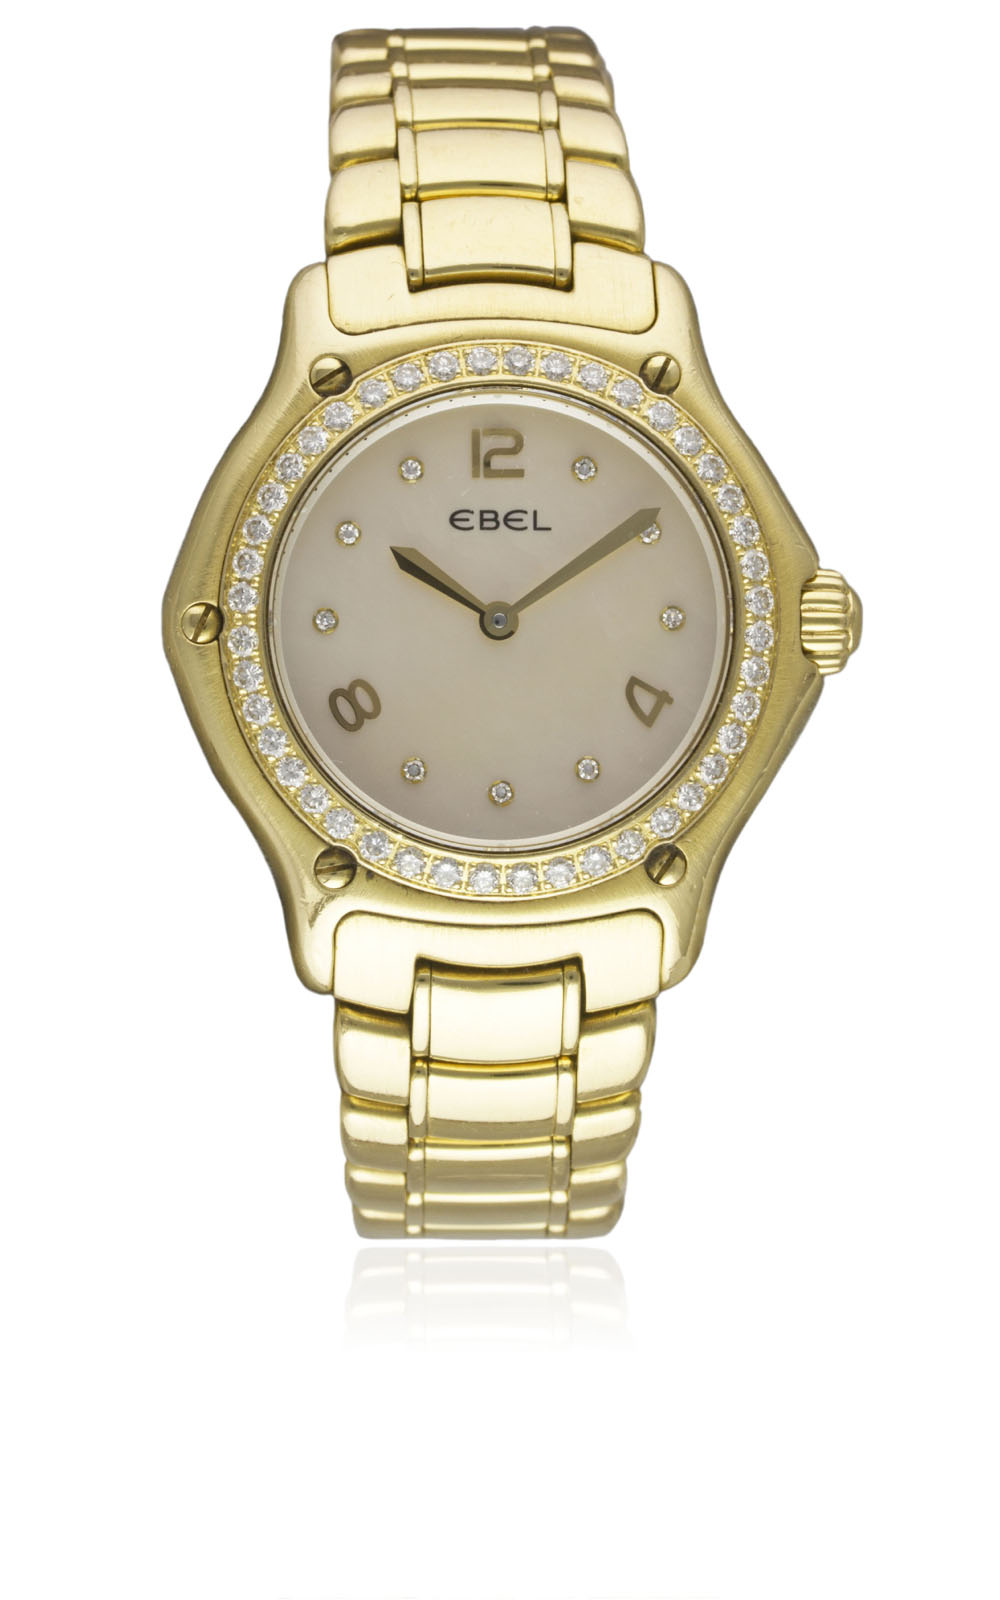 A LADIES 18K SOLID GOLD & DIAMOND EBEL 1911 BRACELET WATCH CIRCA 2000s, REF. E8090224 WITH